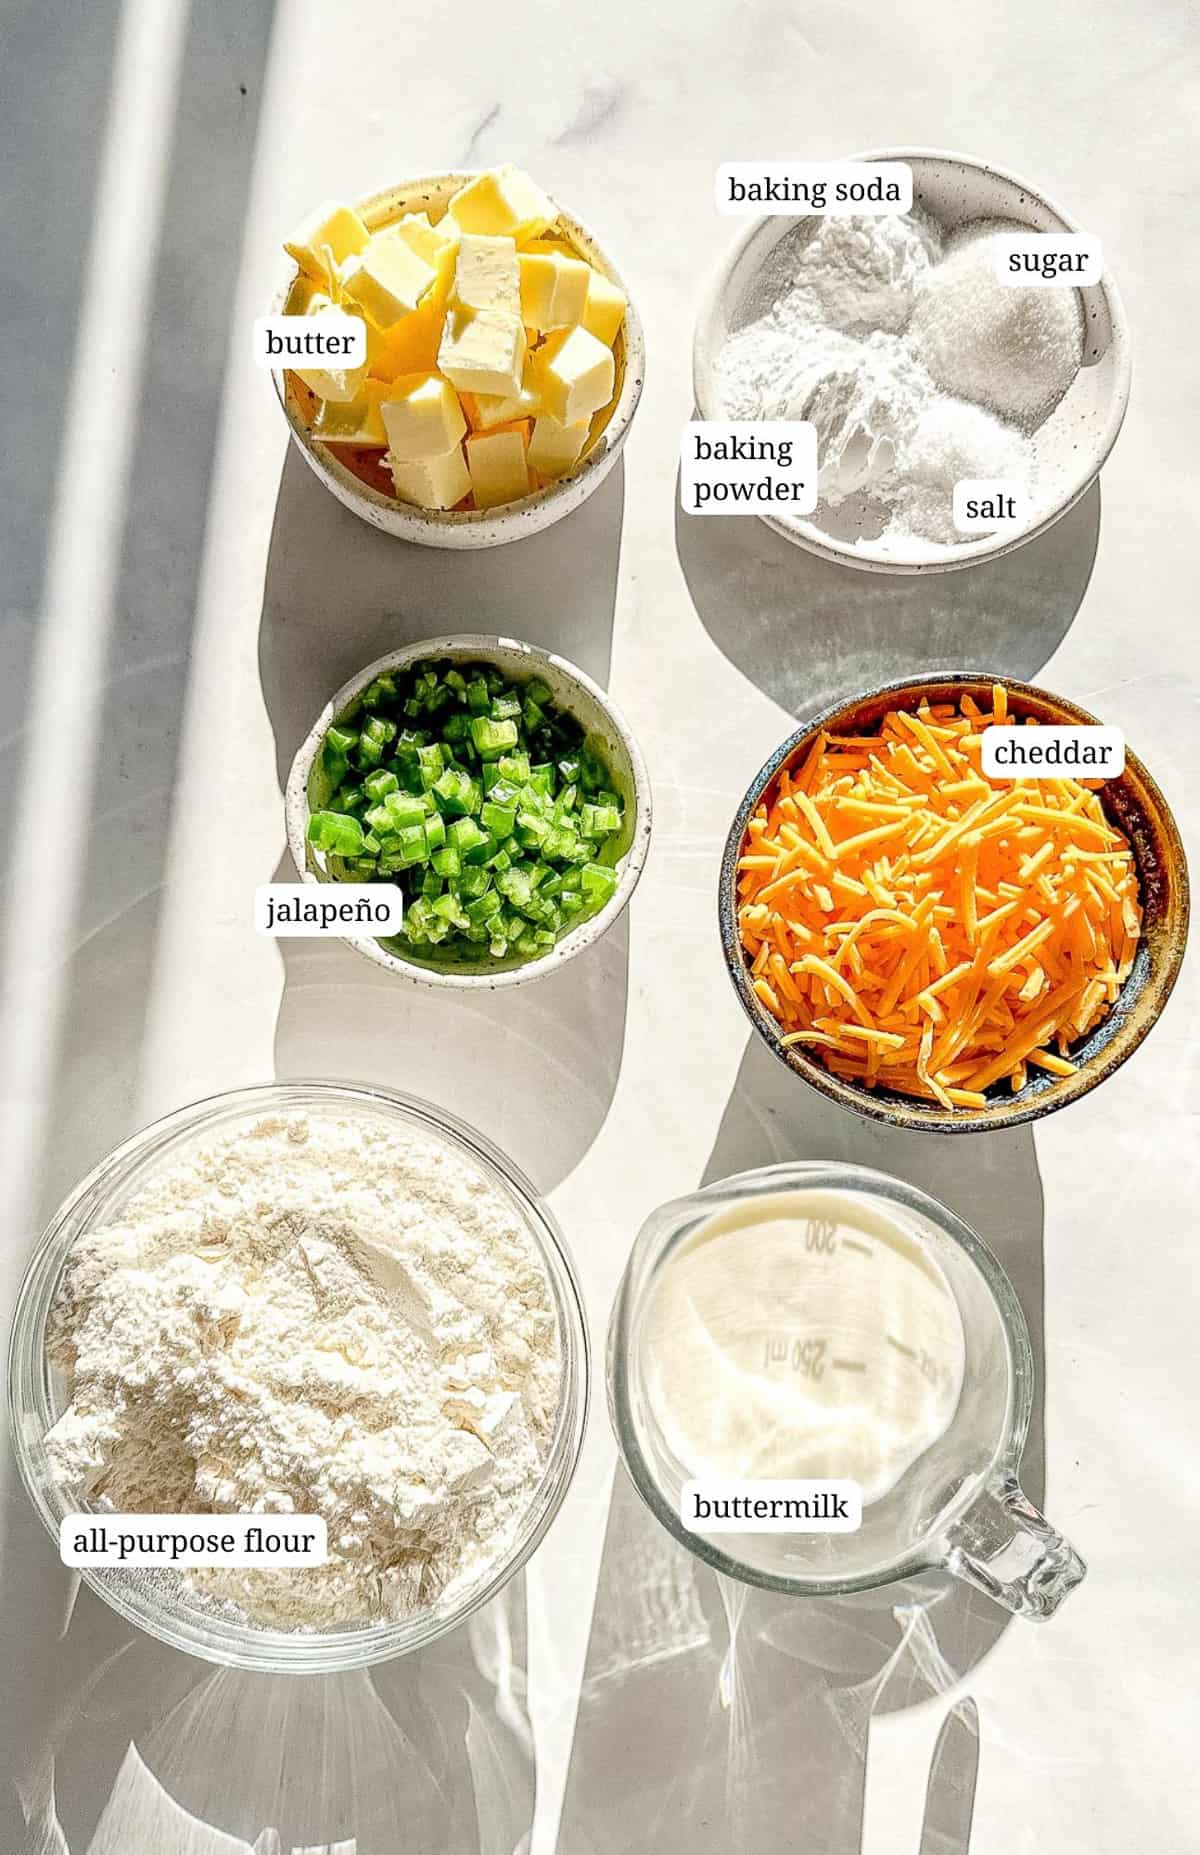 Labeled image showing ingredients to make jalapeno cheddar biscuits.